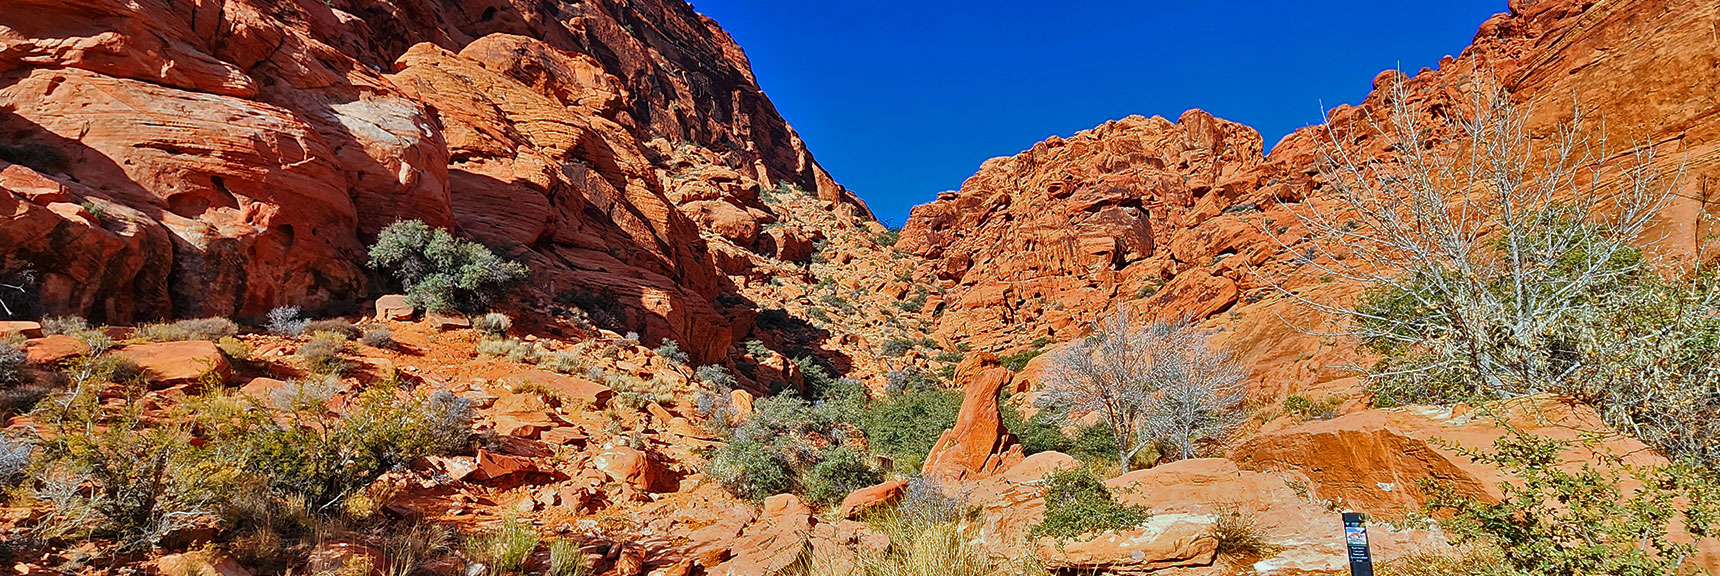 Best Route is to Upper Left Through Passage. No Marked Trails. Weave Through Boulders. | Lower Calico Hills Loop | Calico Basin & Red Rock Canyon, Nevada